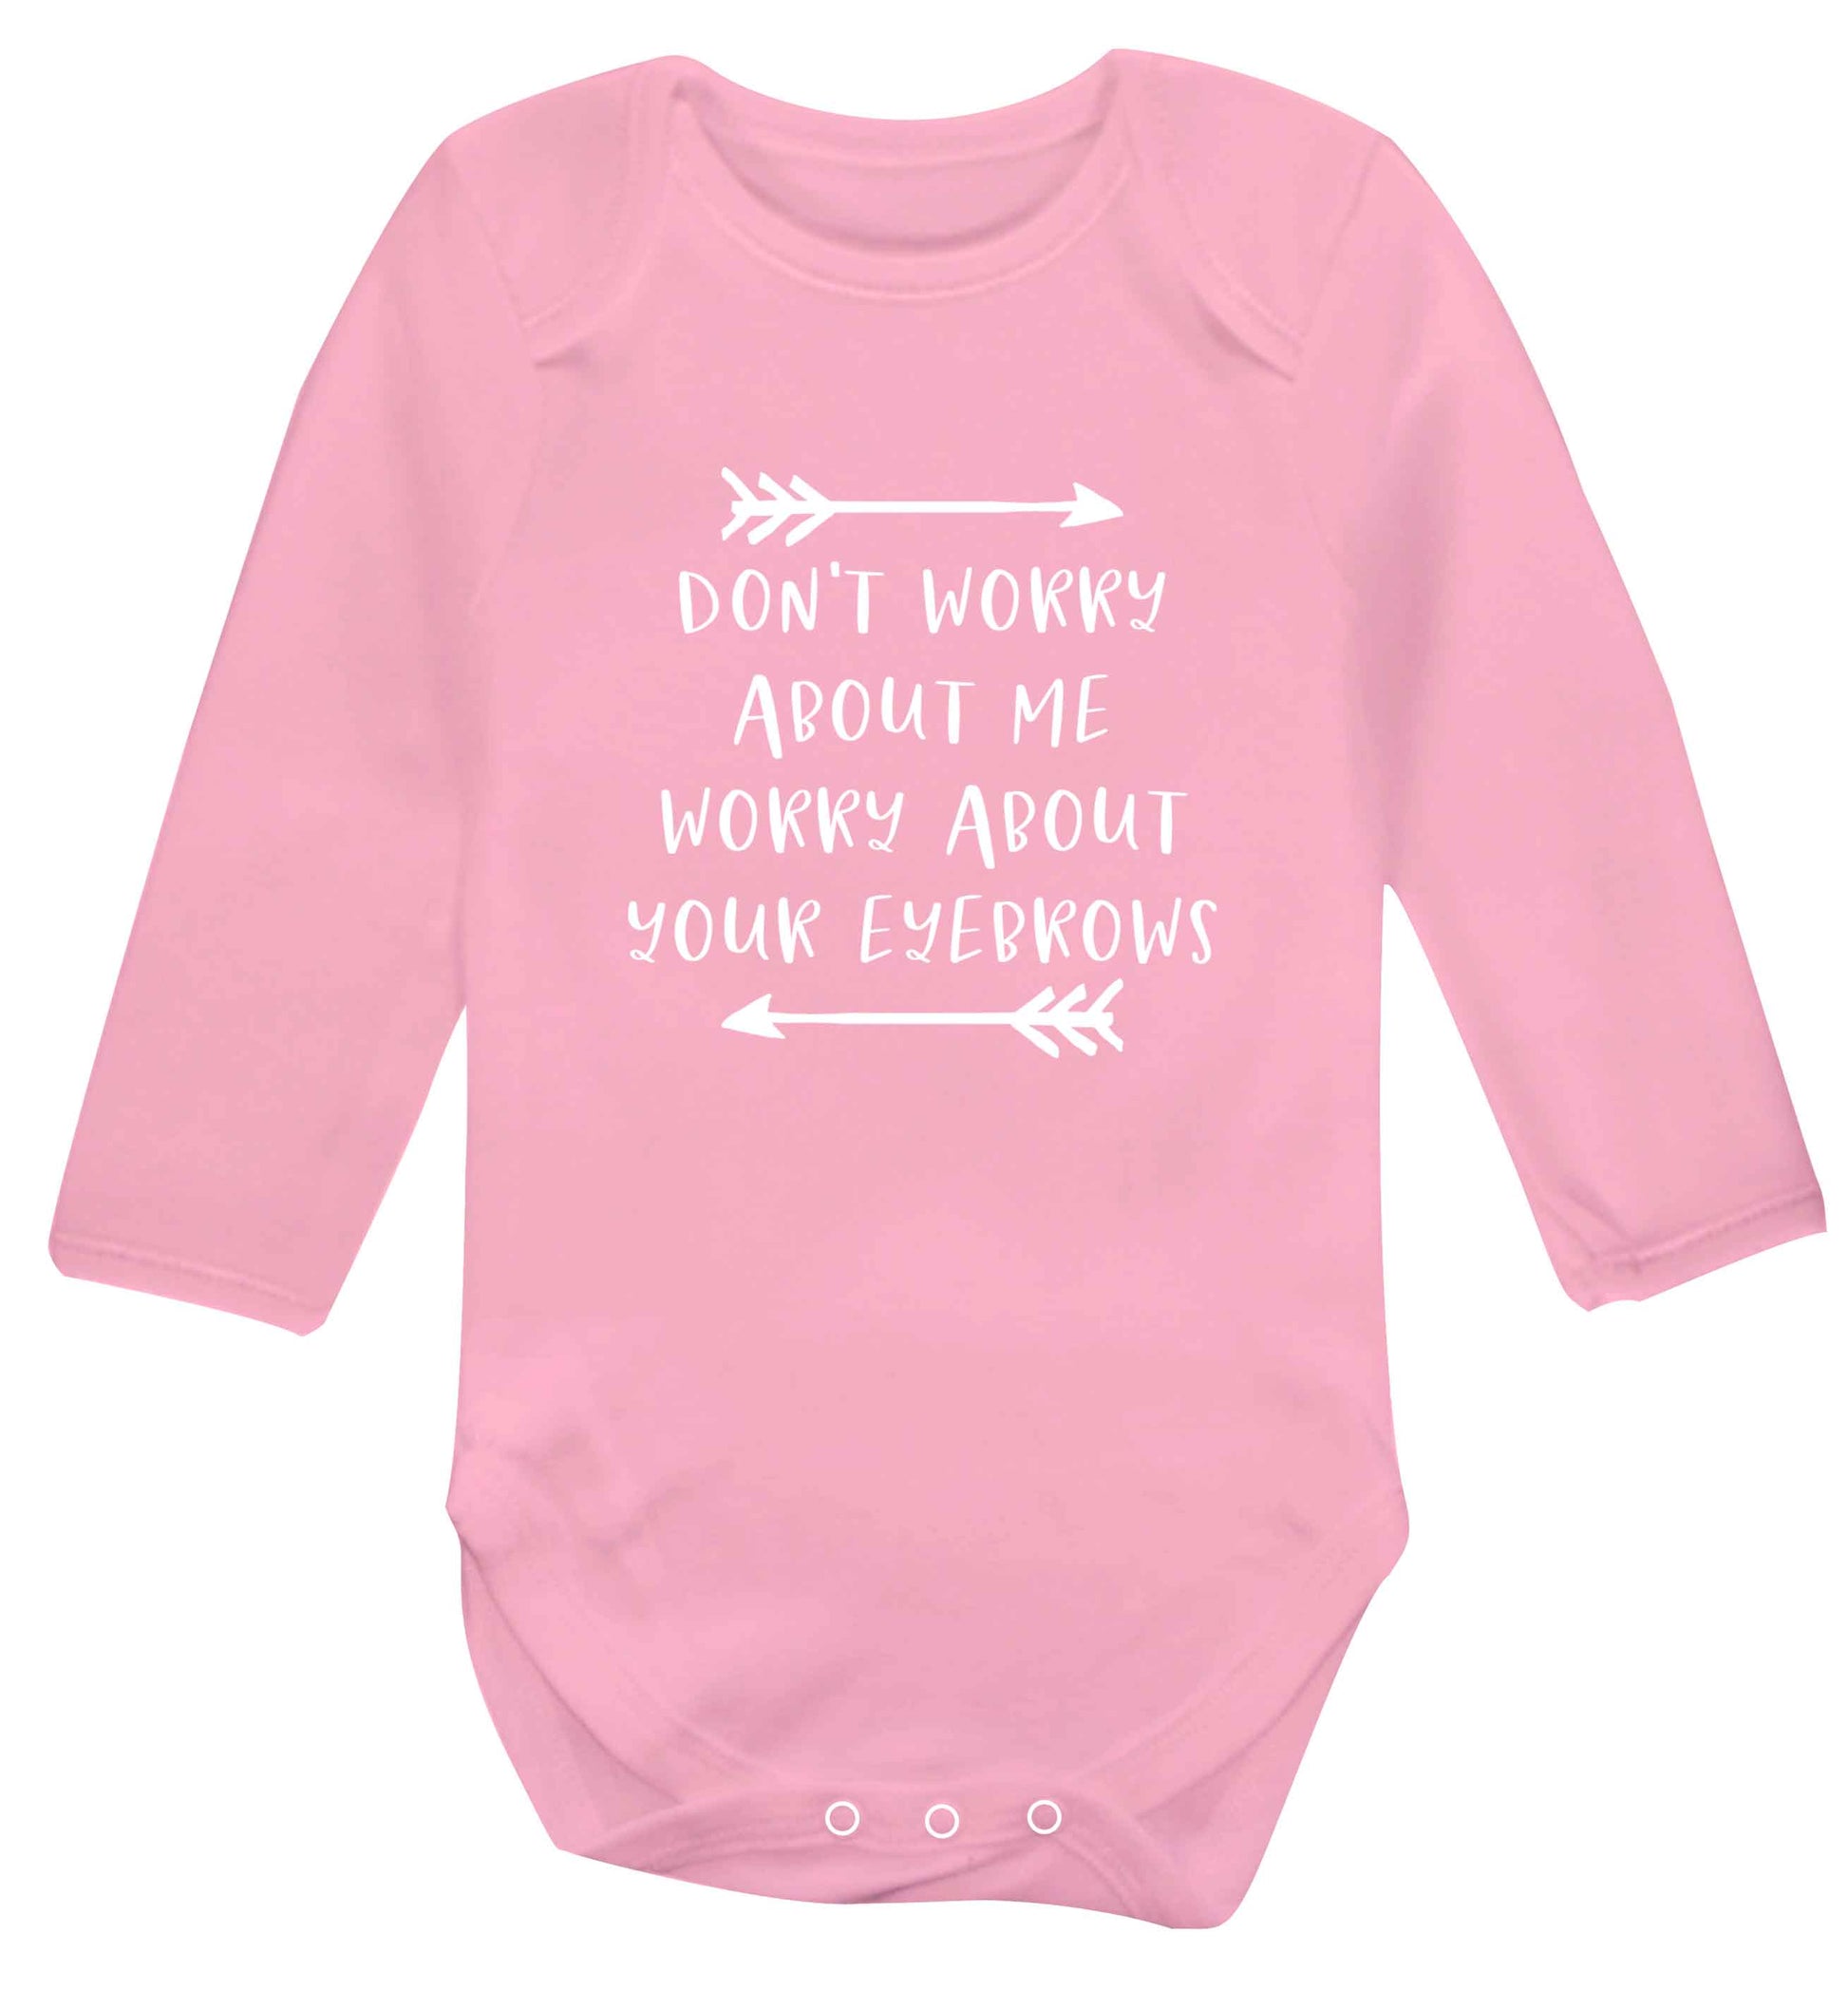 Don't worry about me worry about your eyebrows baby vest long sleeved pale pink 6-12 months